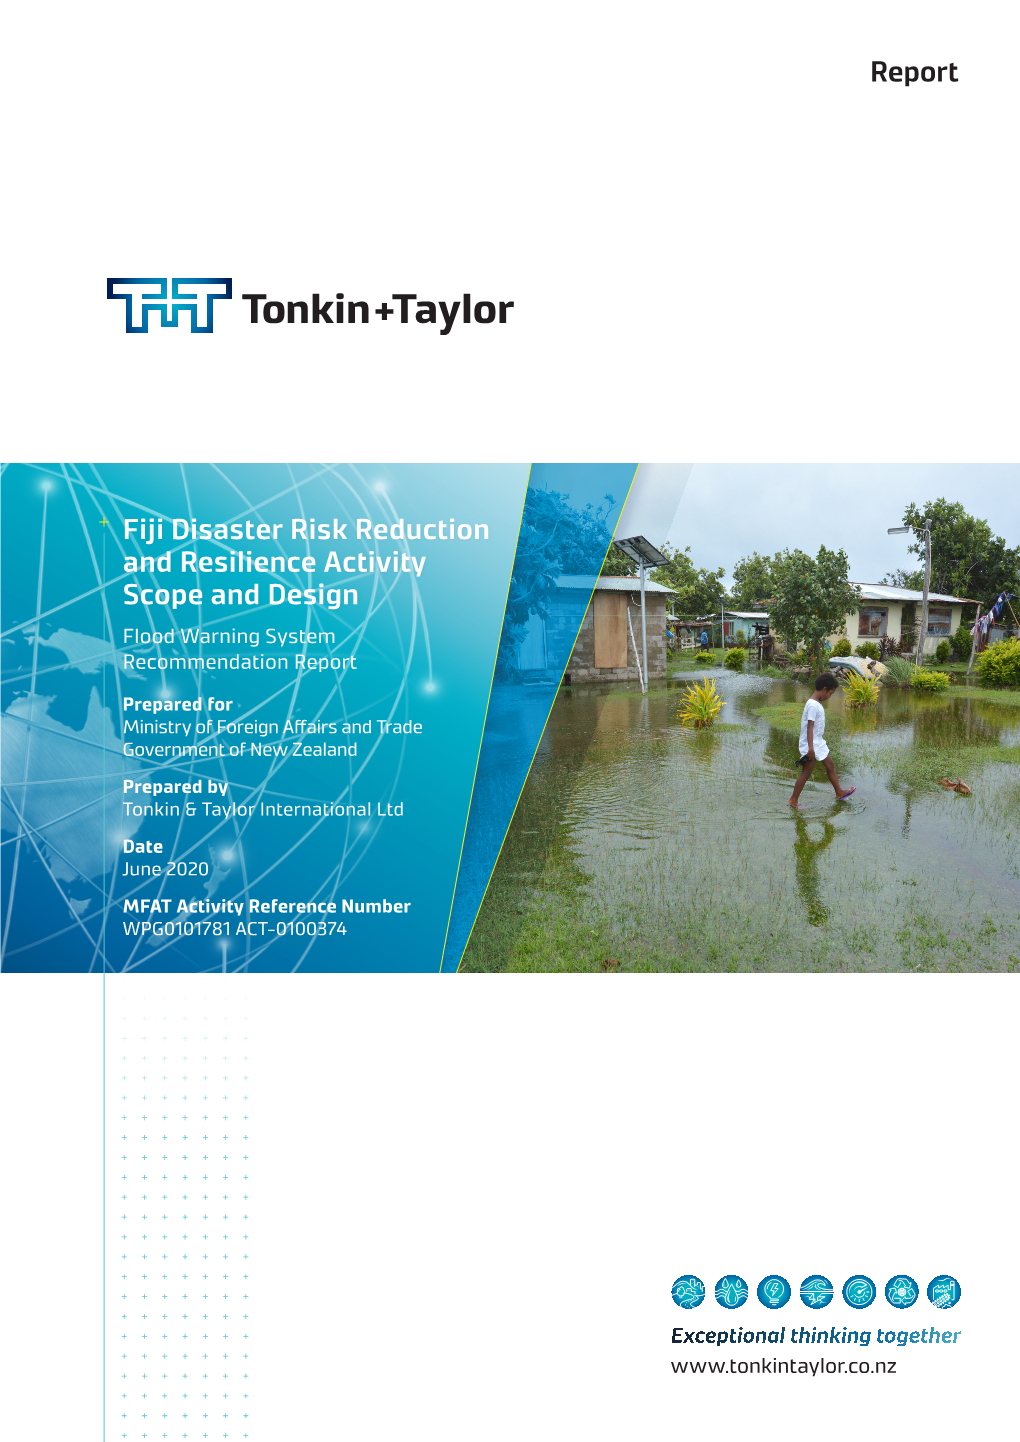 Fiji Disaster Risk Reduction and Resilience Activity Scope and Design Flood Warning System Recommendation Report